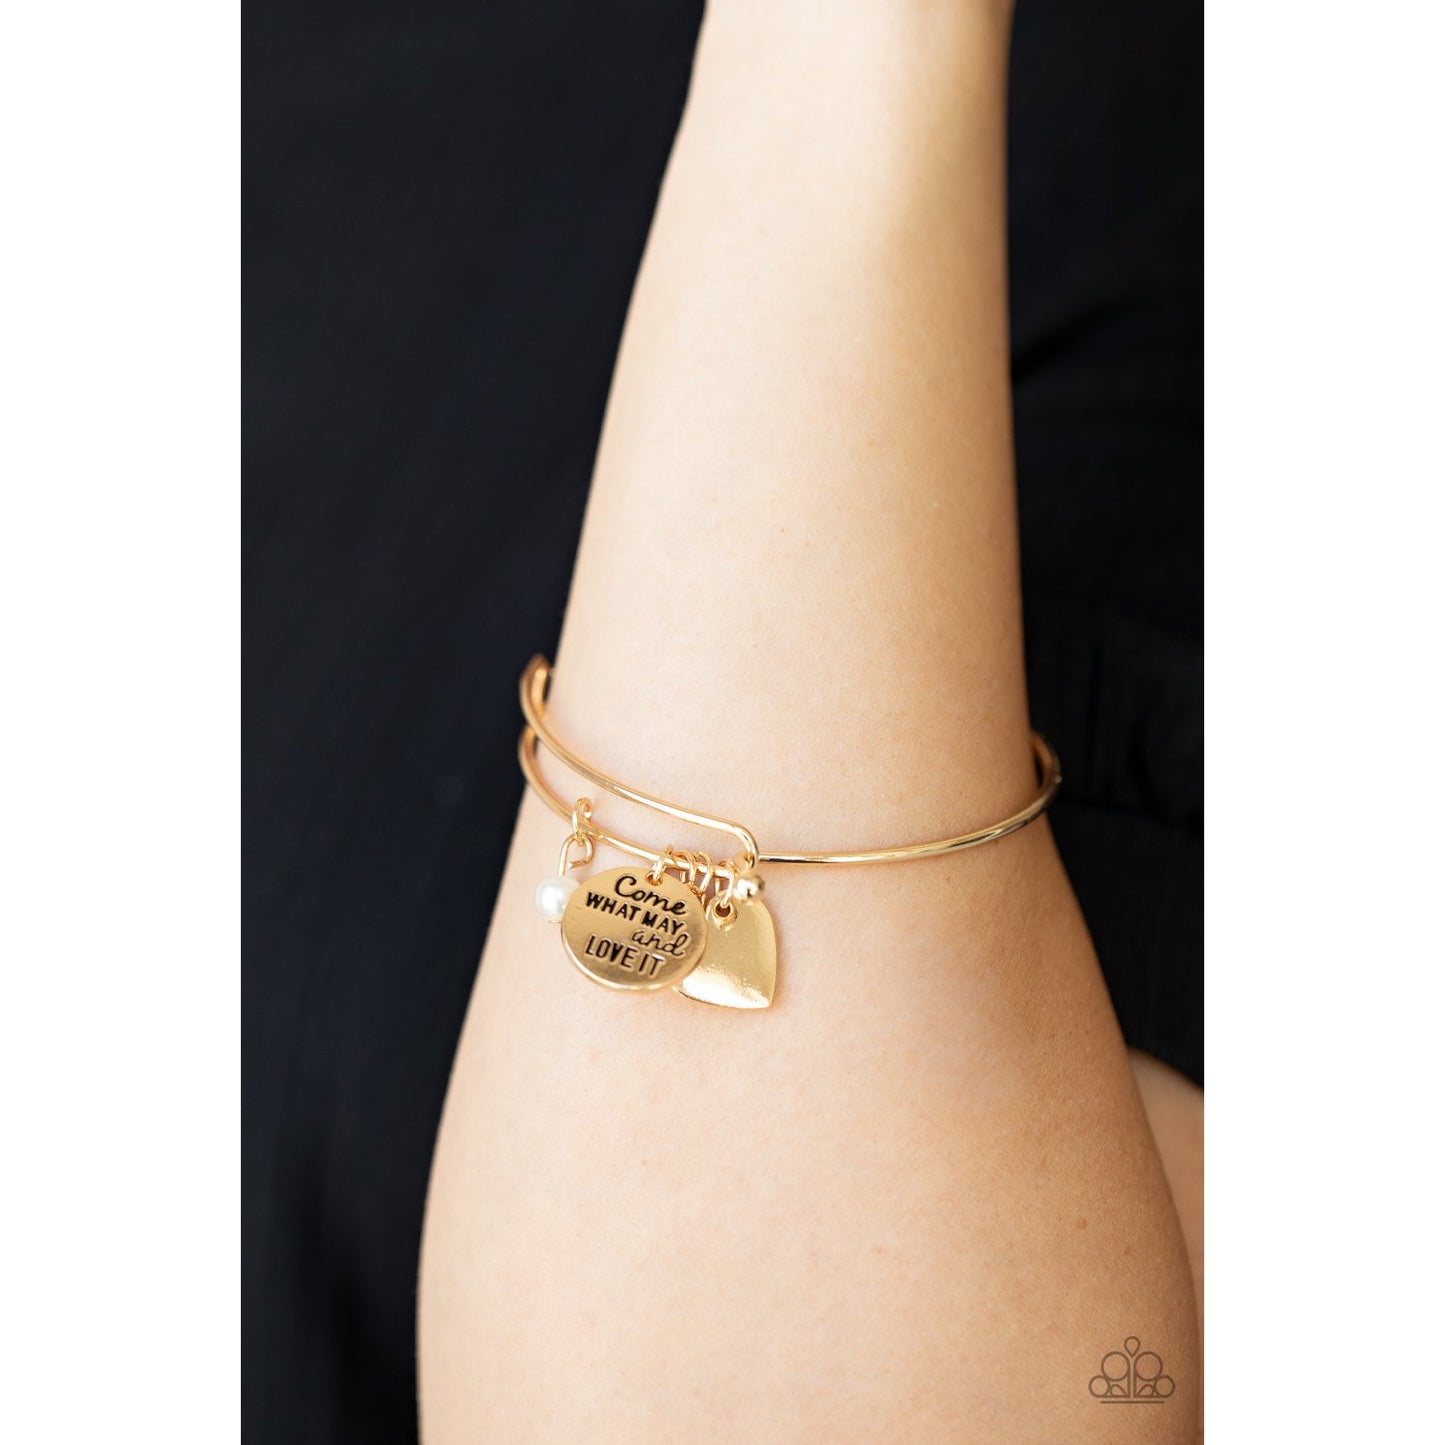 Come What May and Love It - Gold Bracelet - Paparazzi Accessories - GlaMarous Titi Jewels